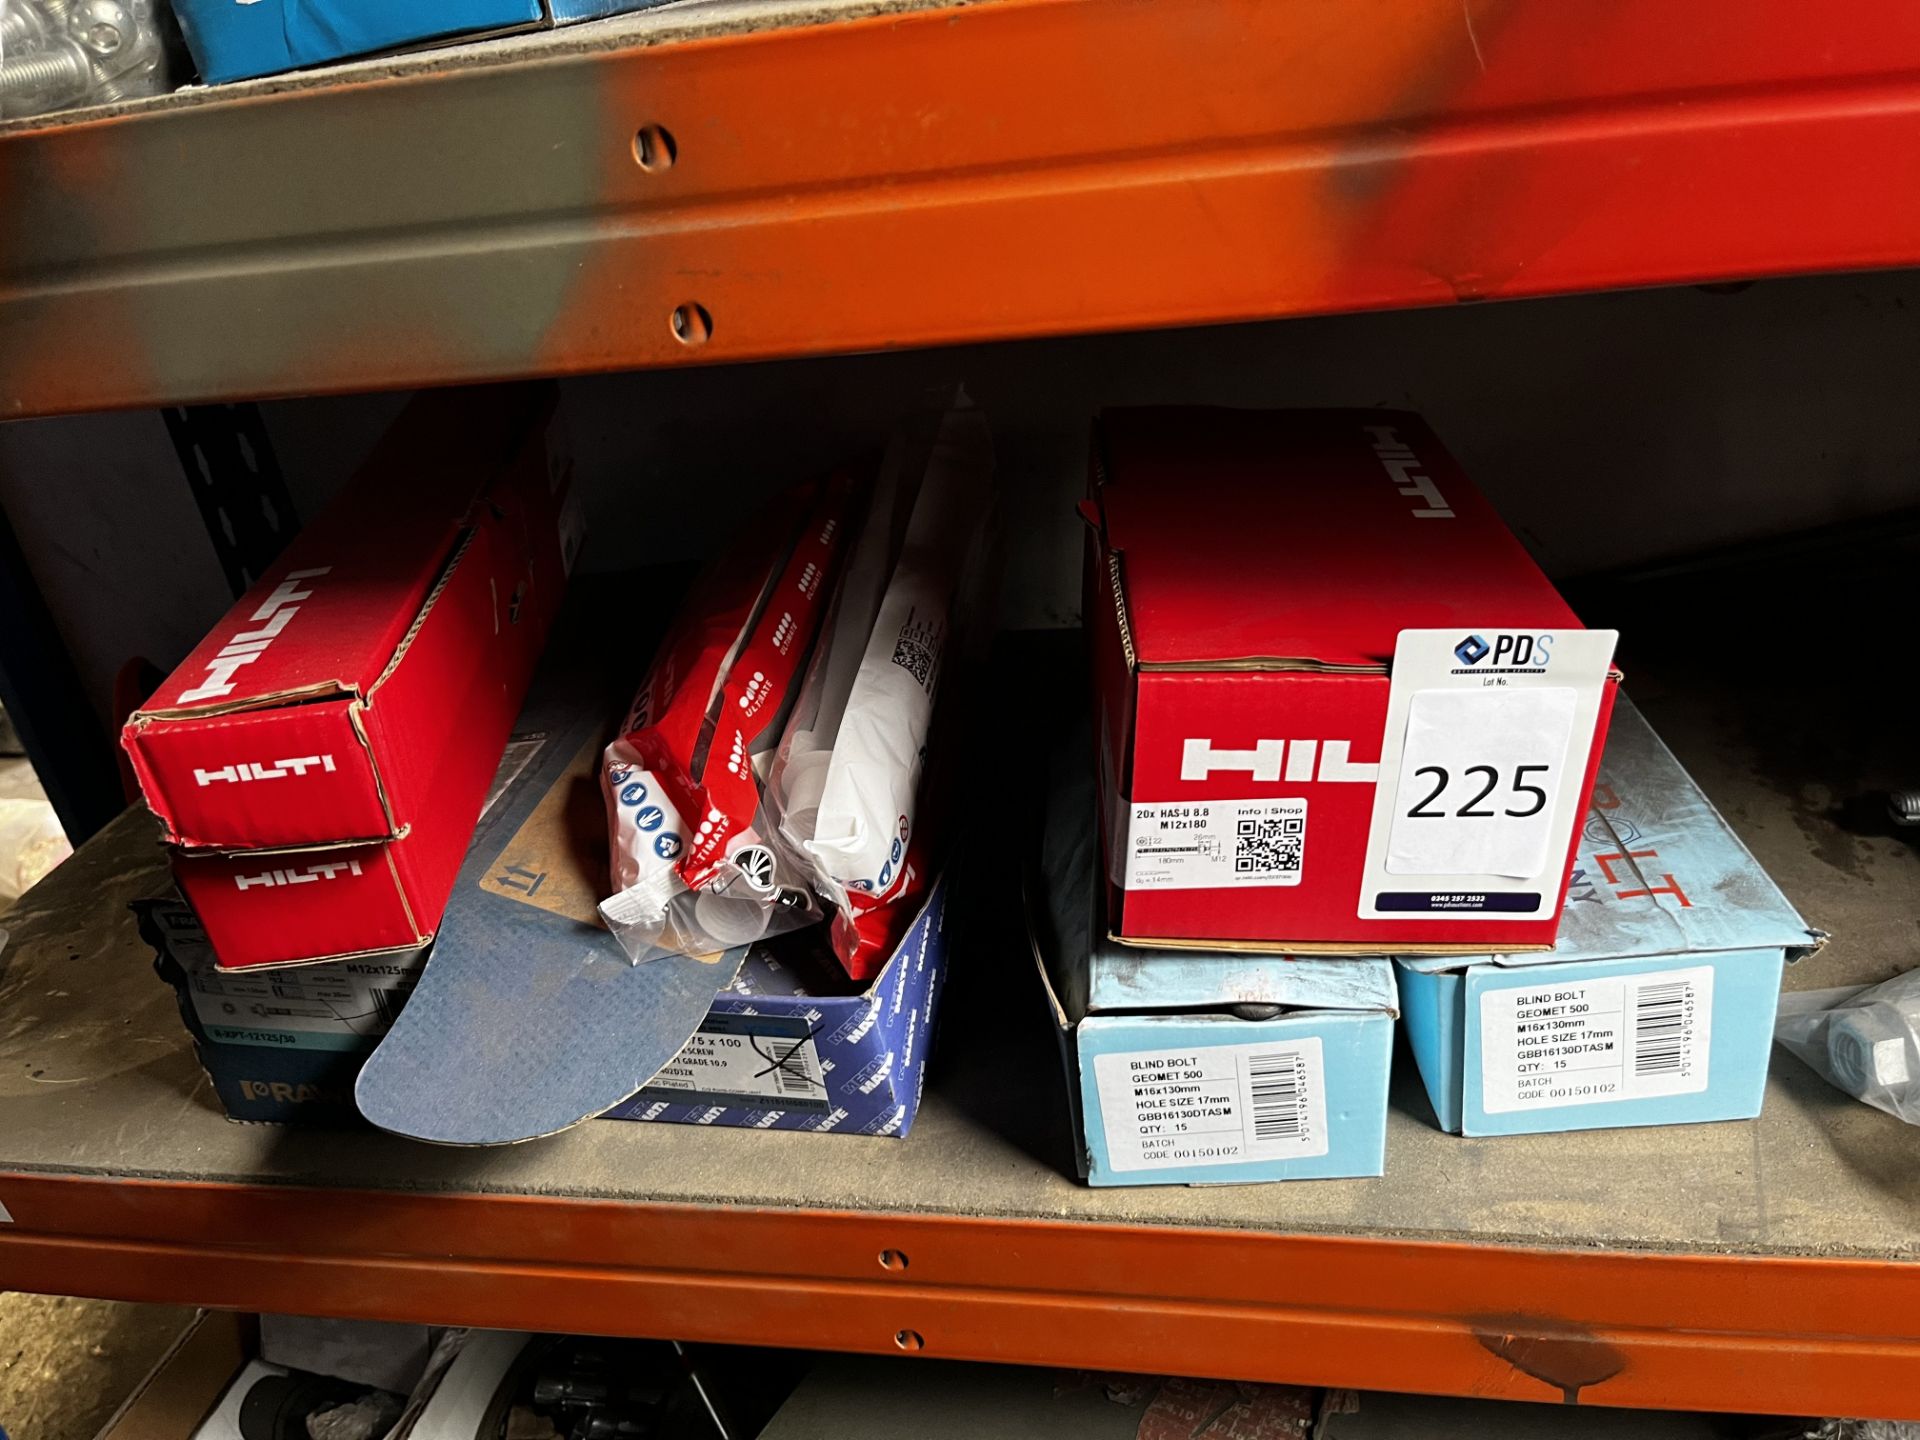 Rawl Plugs & Blind Bolt Fixings etc. (Location: Tottenham. Please Refer to General Notes)